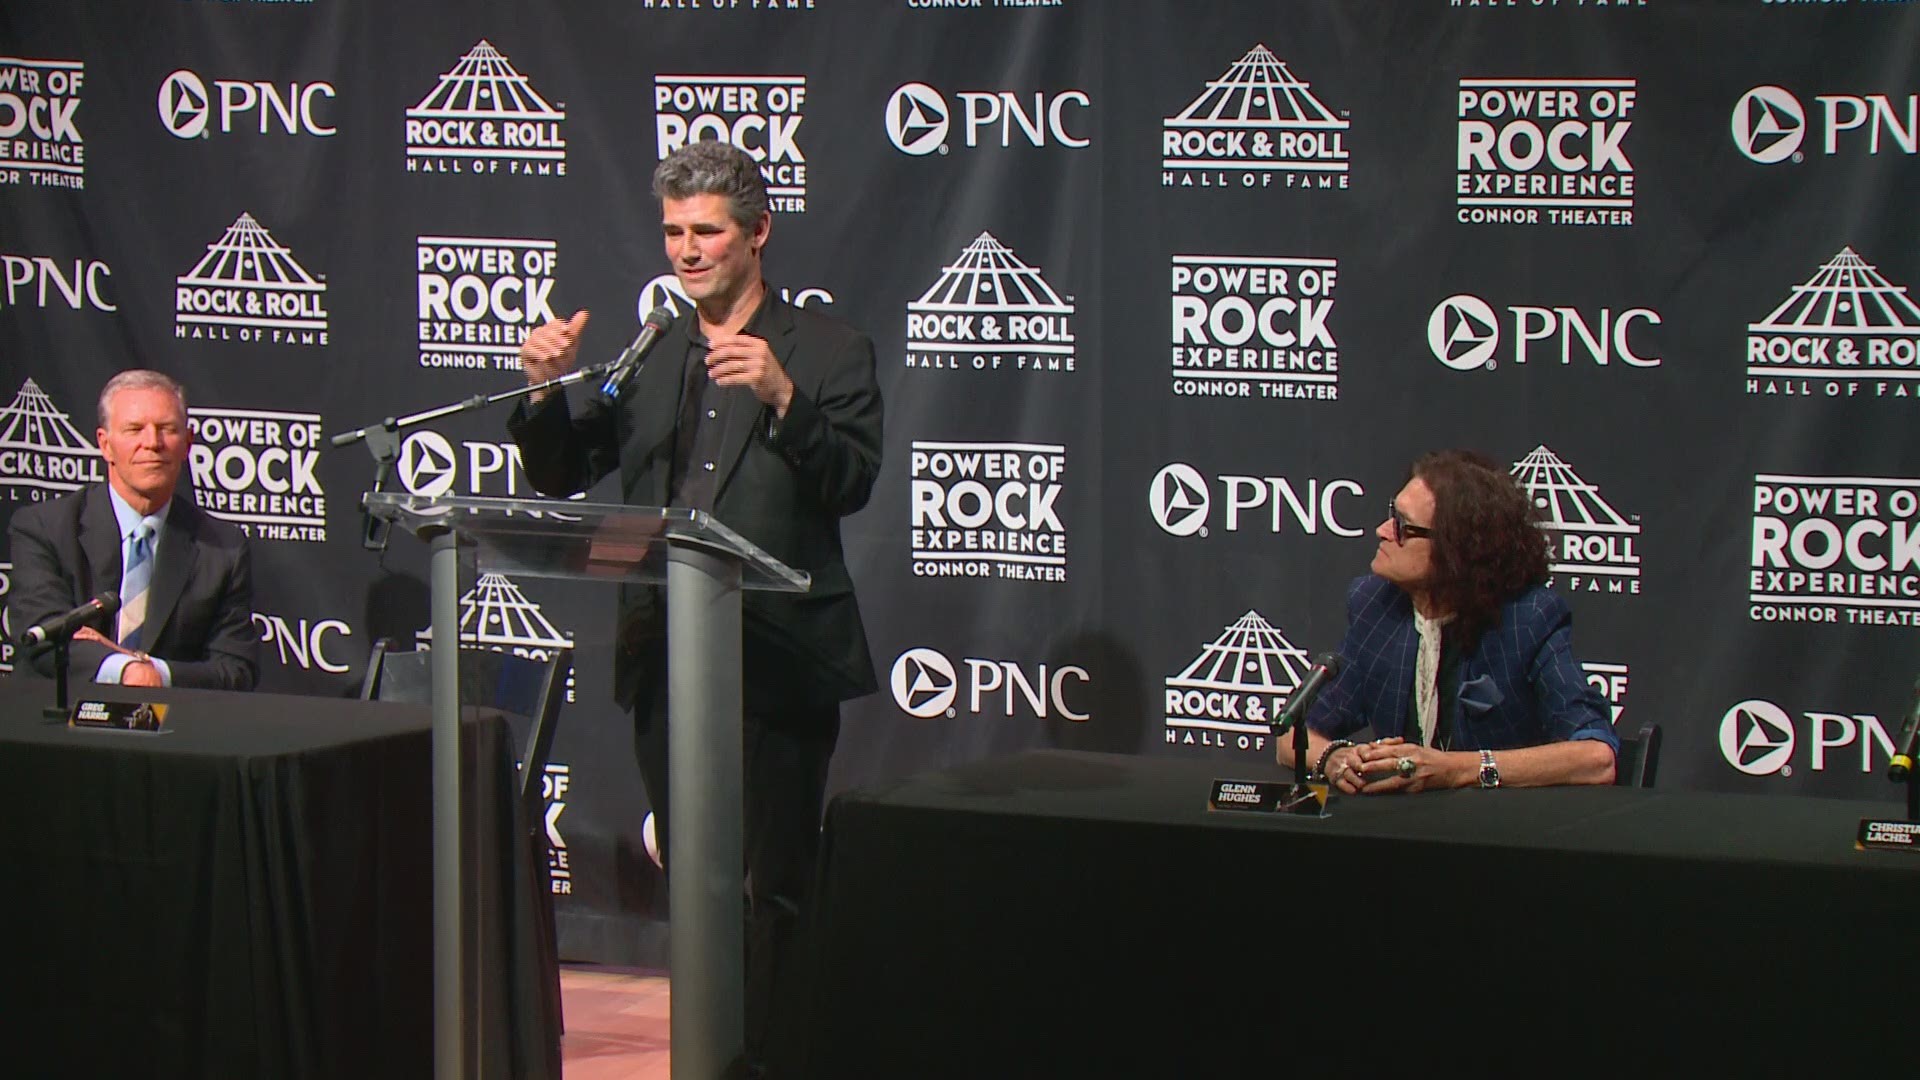 June 29, 2017: Glenn Hughes of the band Deep Purple, 2016 Rock and Roll Hall of Fame Inductee, was the honorary ambassador for the unveiling of the new 'Power of Rock Experience' exhibit.